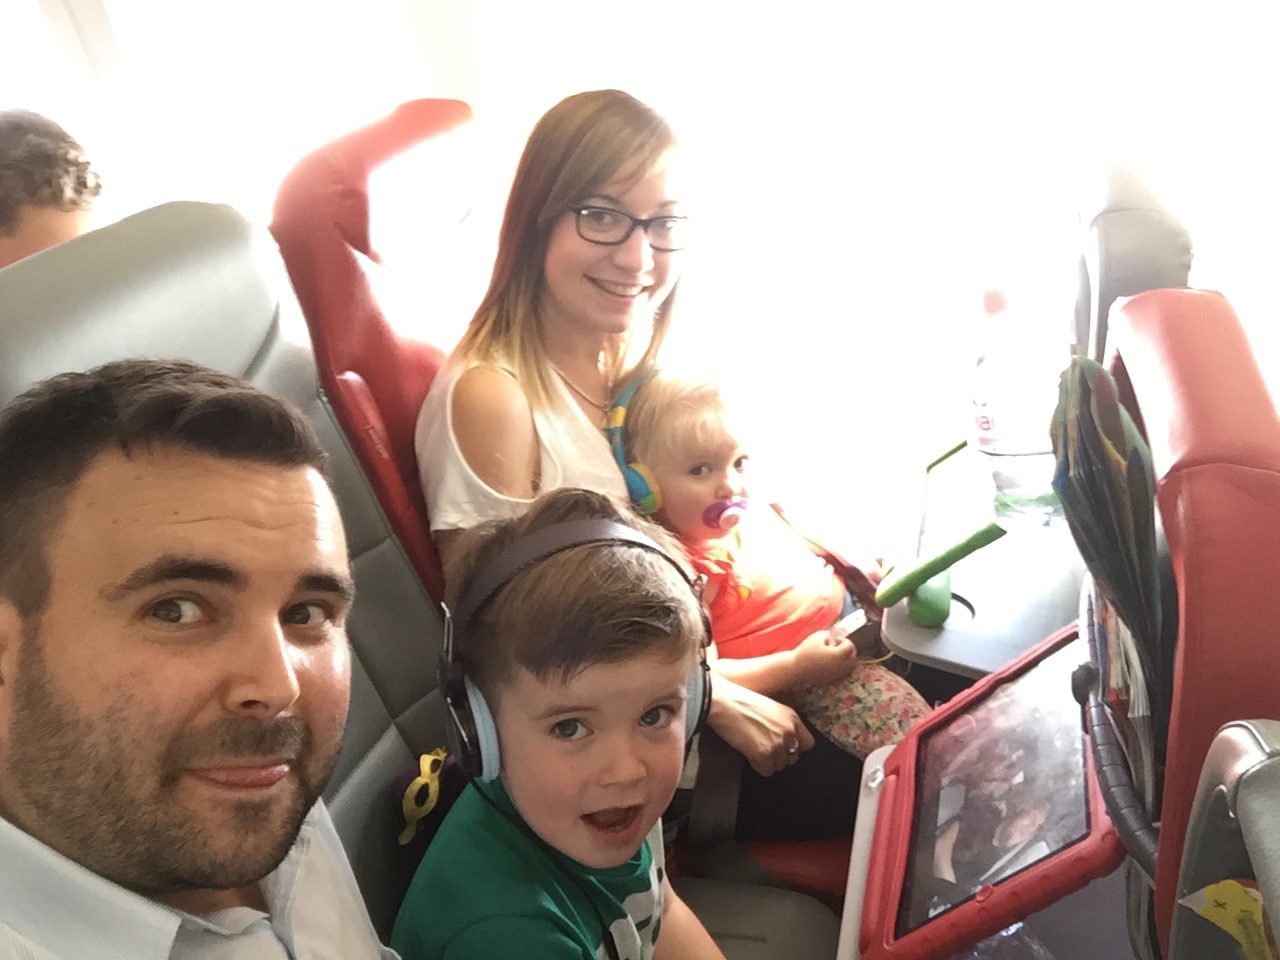 Top 10 going on holiday abroad with little ones